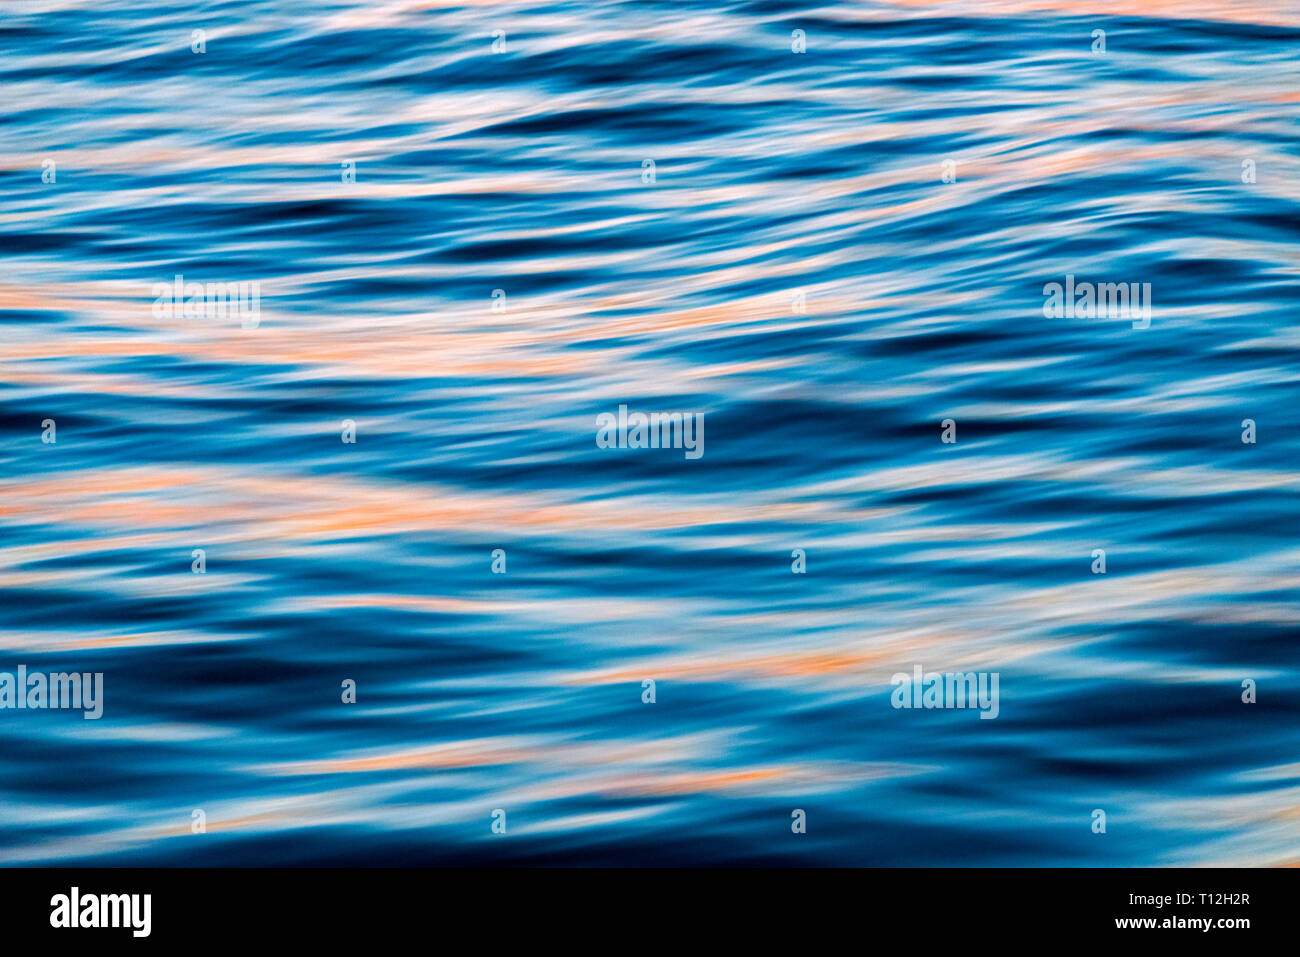 Ocean waves at sunset, Greenland Stock Photo